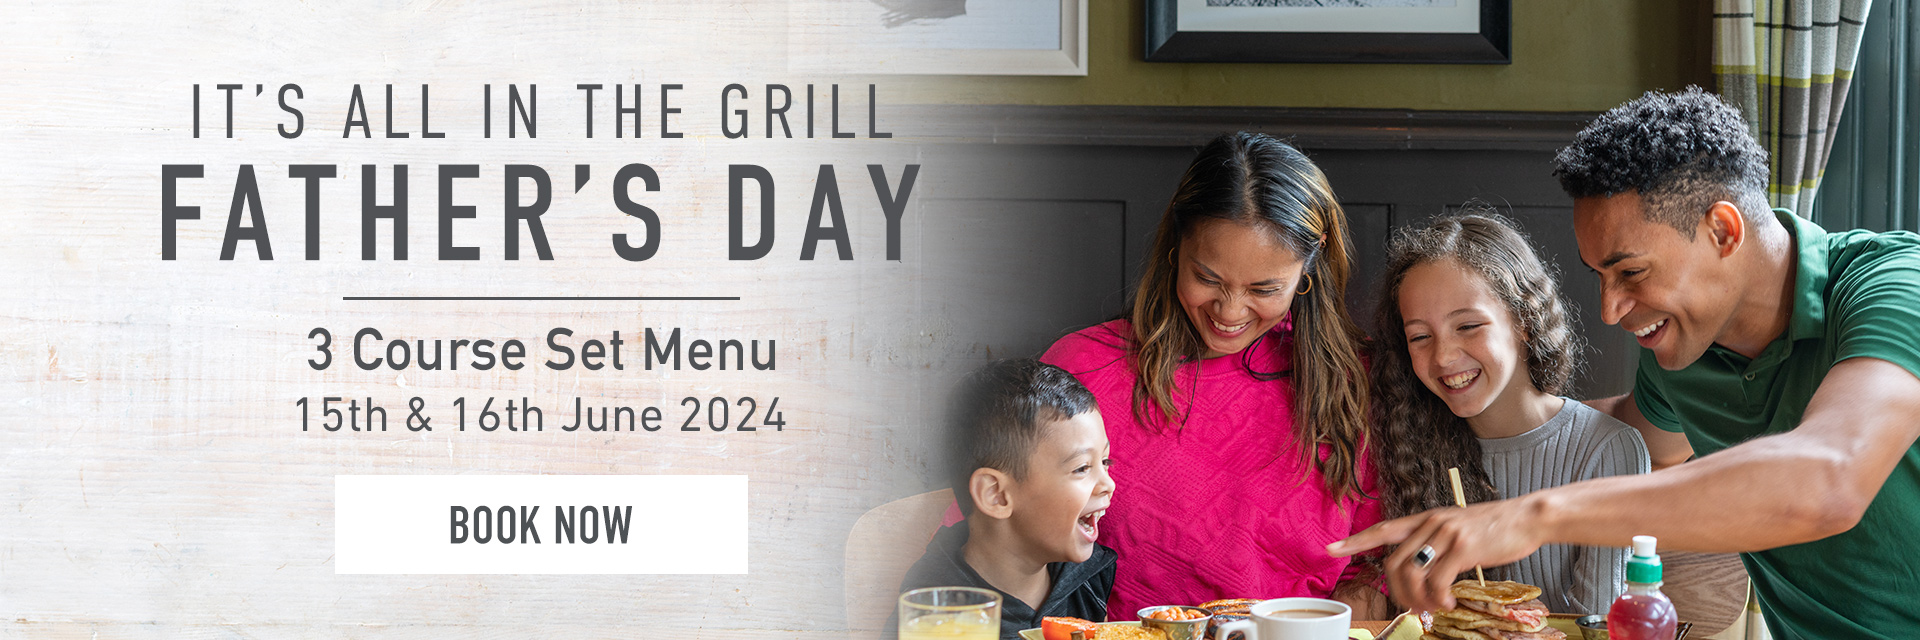 Father’s Day at Harvester Flamstead